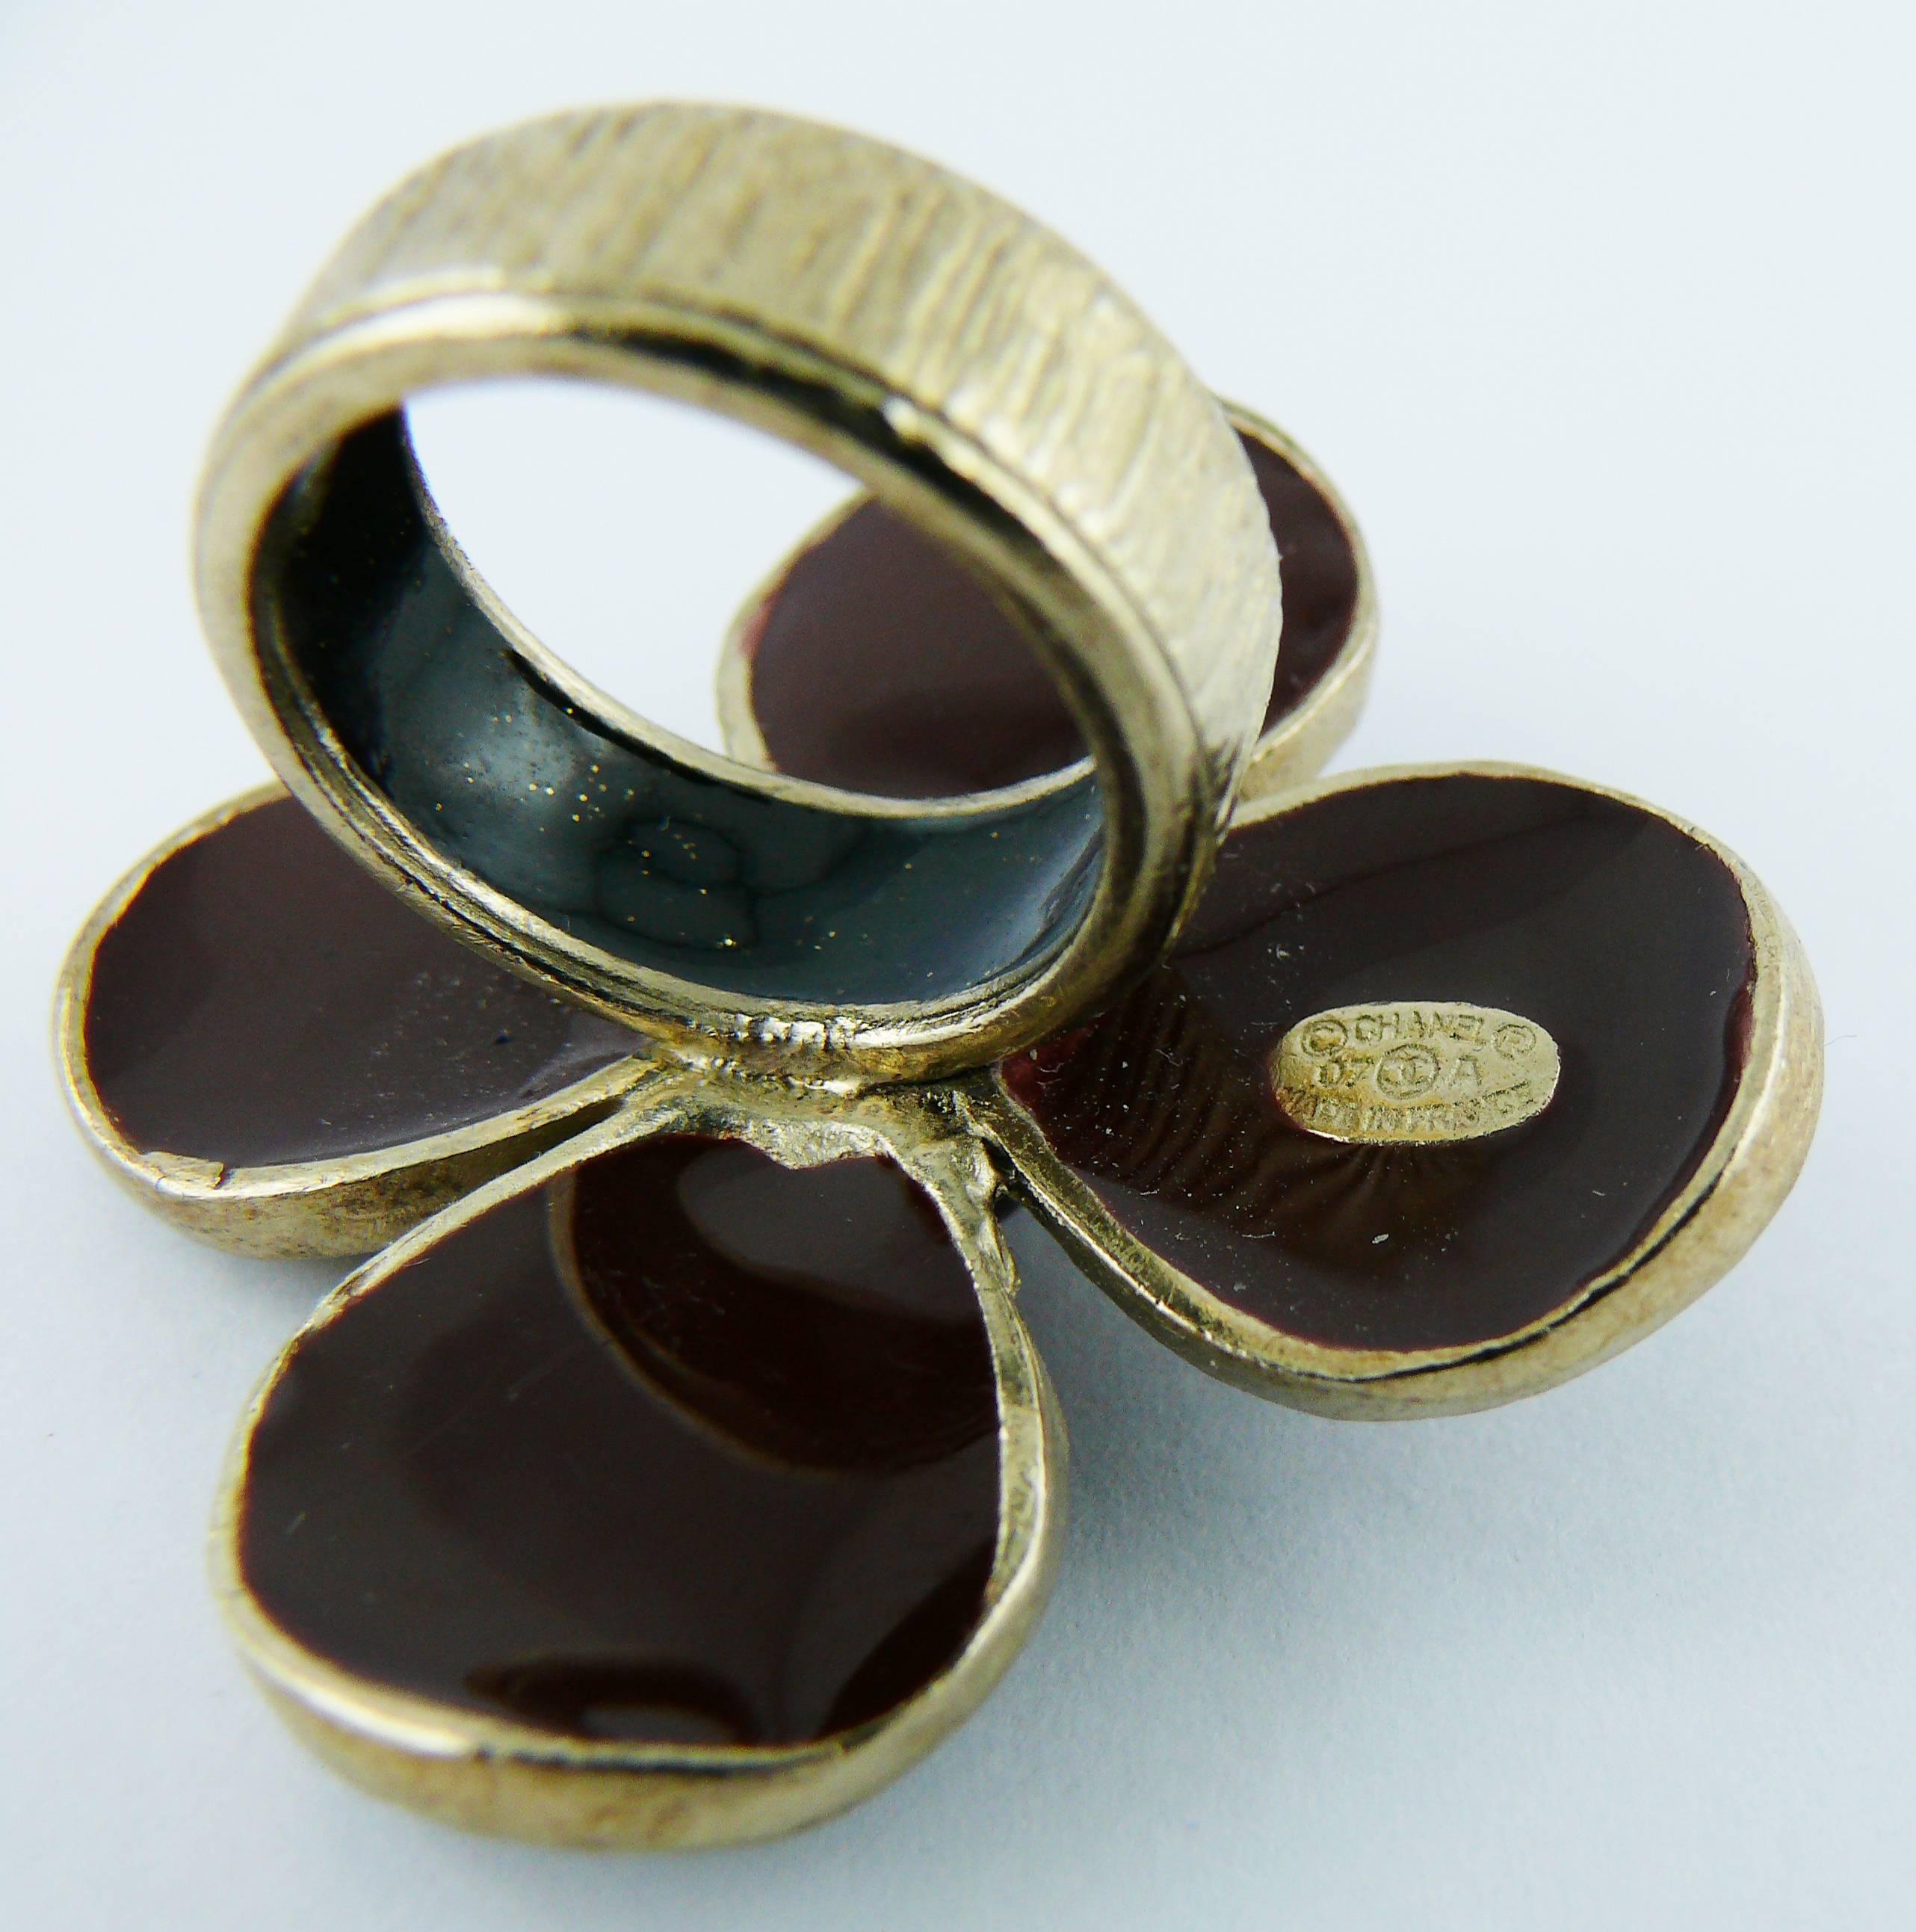 Chanel Brown Clover Ring Fall Winter 2007 1